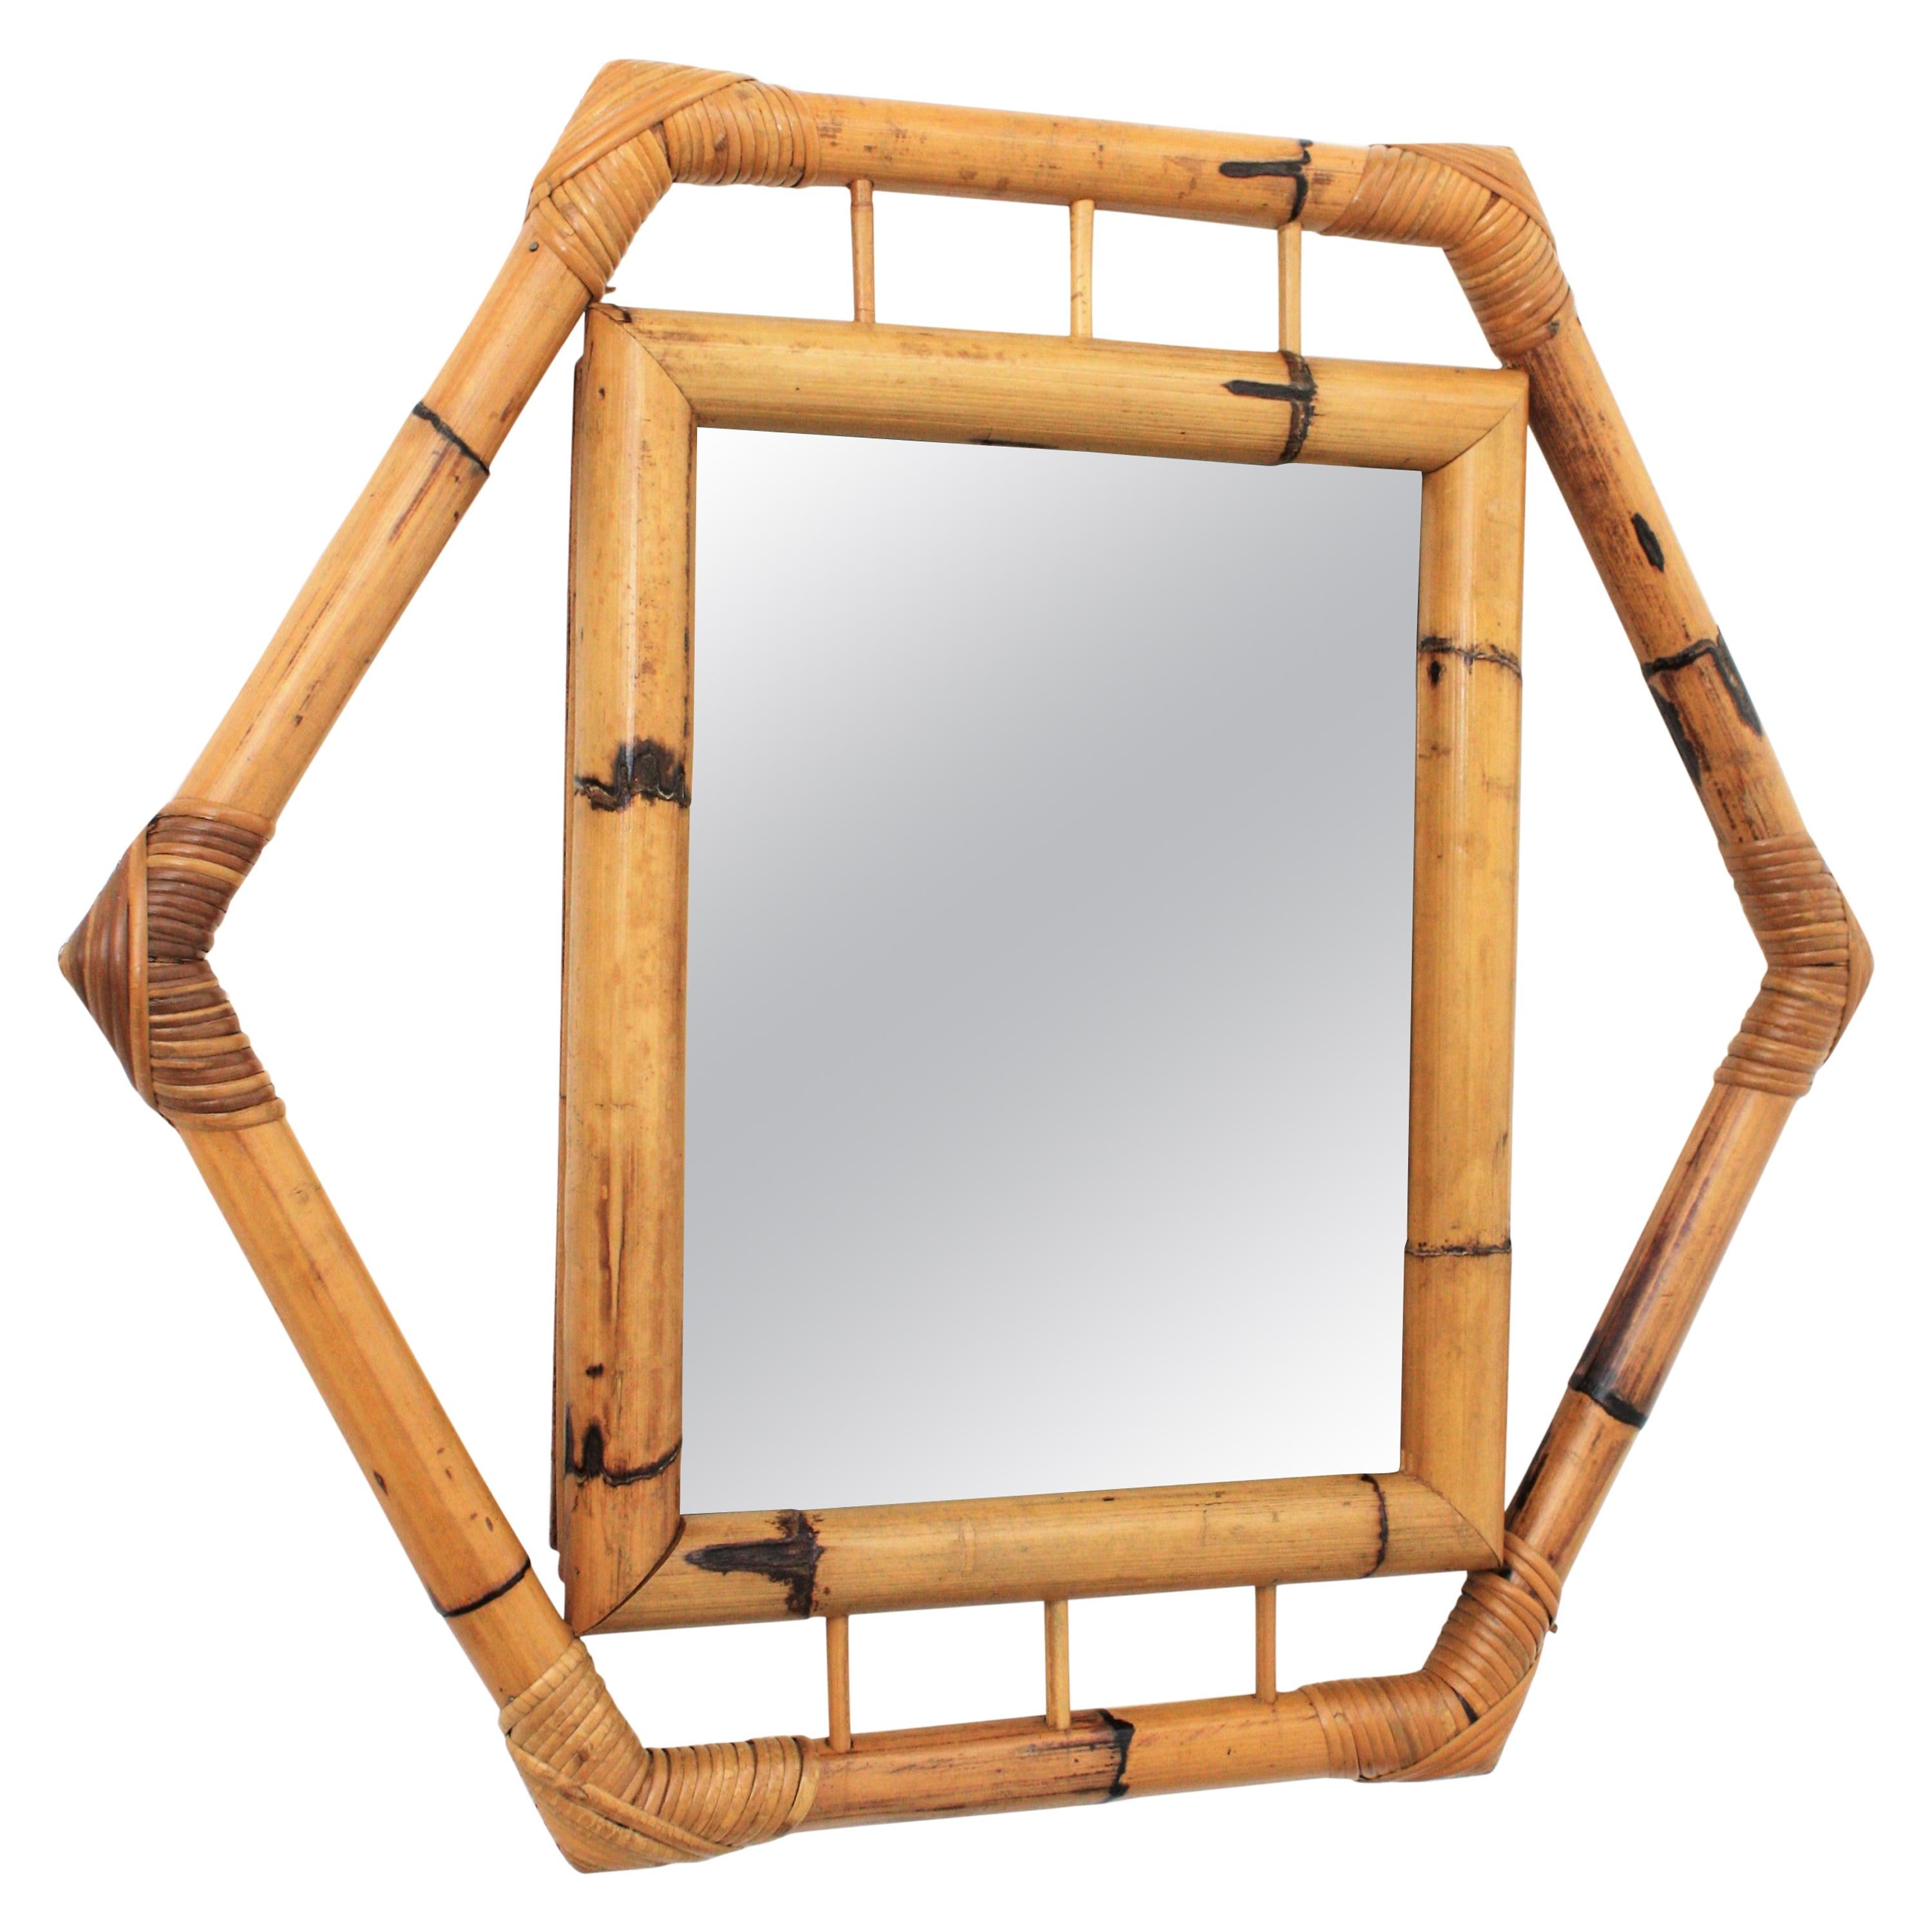 Bamboo Hexagonal Mirror with Smoked Glass, France, 1950s